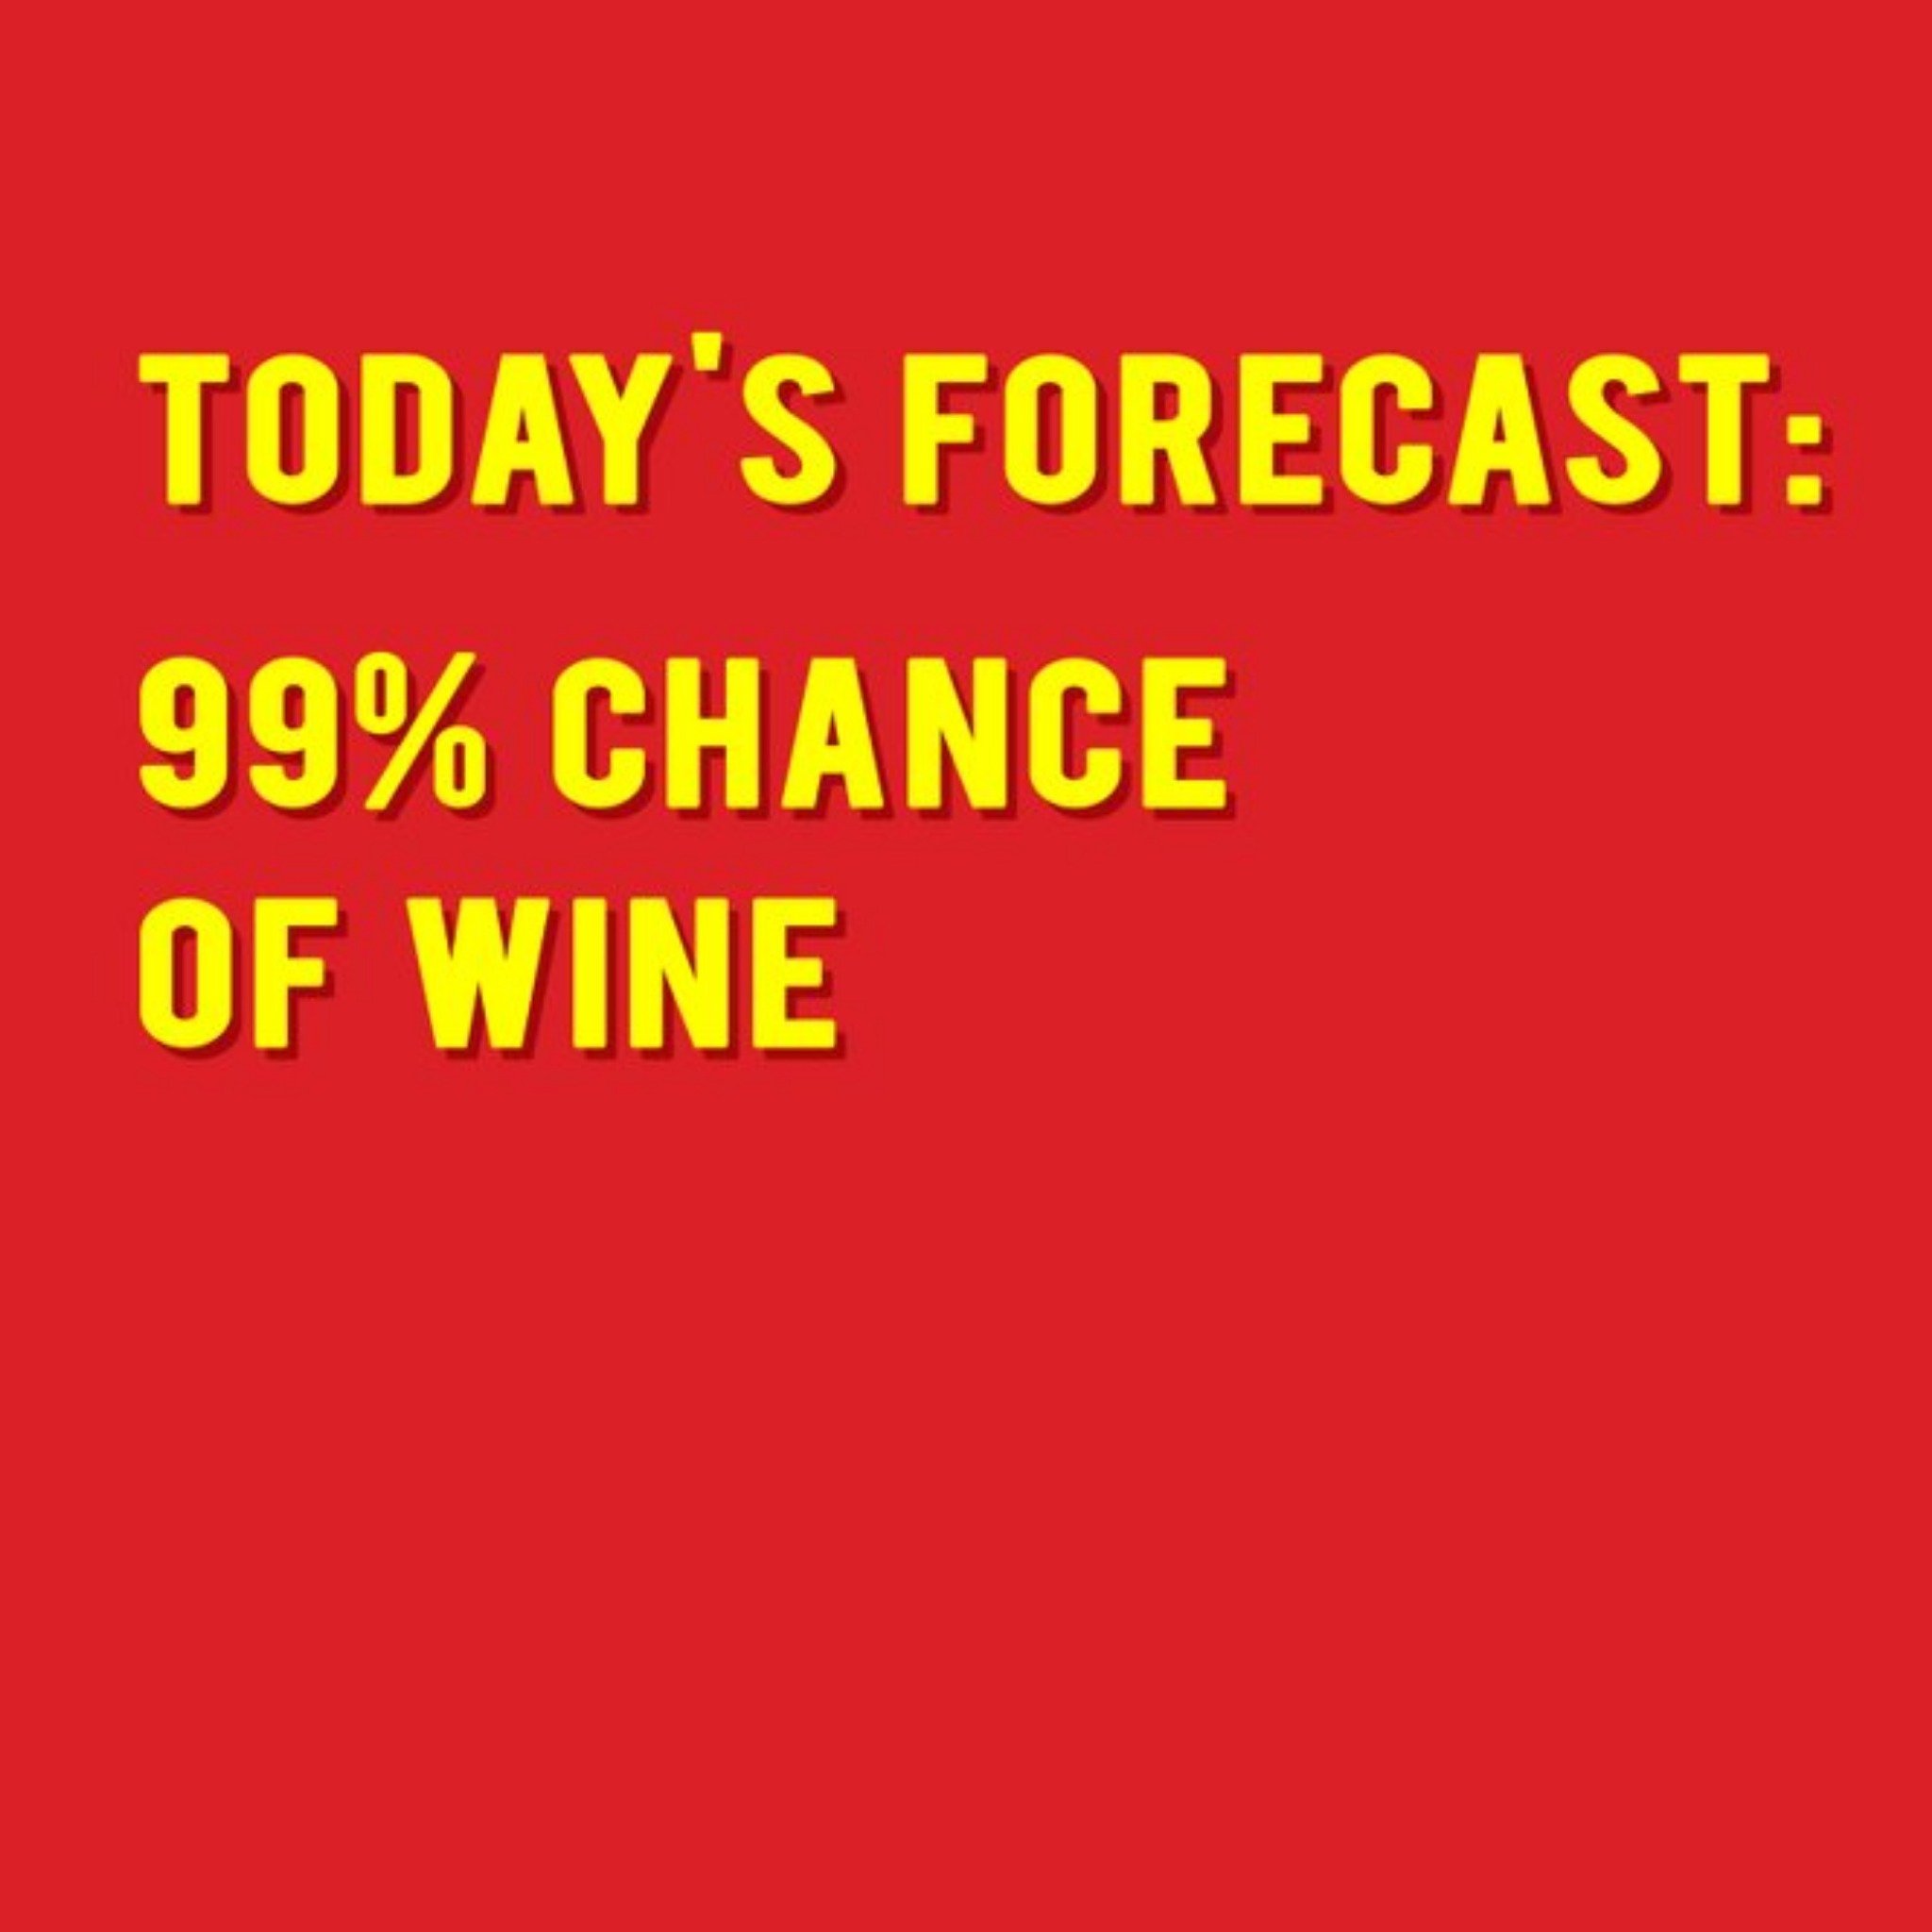 Moonpig Modern Typographical 99 Percent Chance Of Wine Card, Square